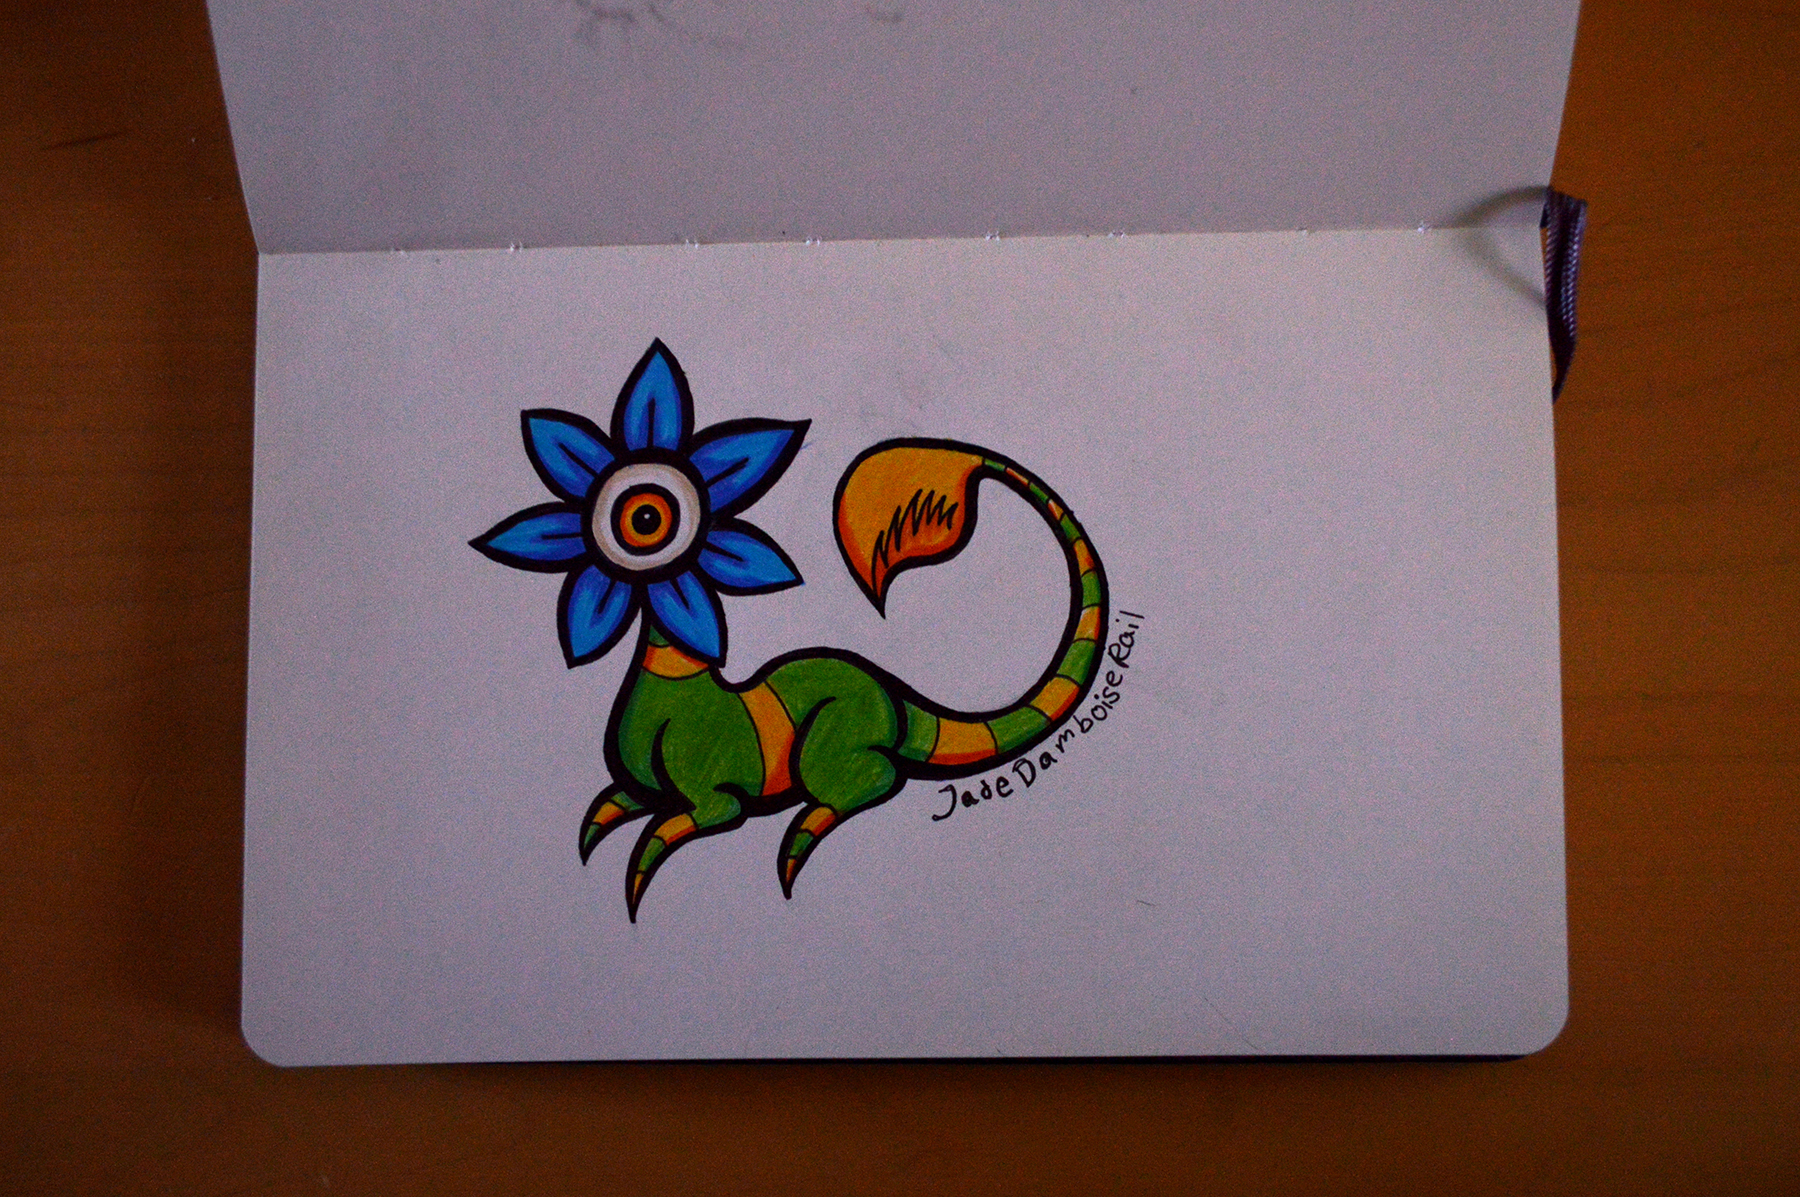 Four legged creature with a flower for a head with an eye between the petals. The tail is a carniverous plant mouth.